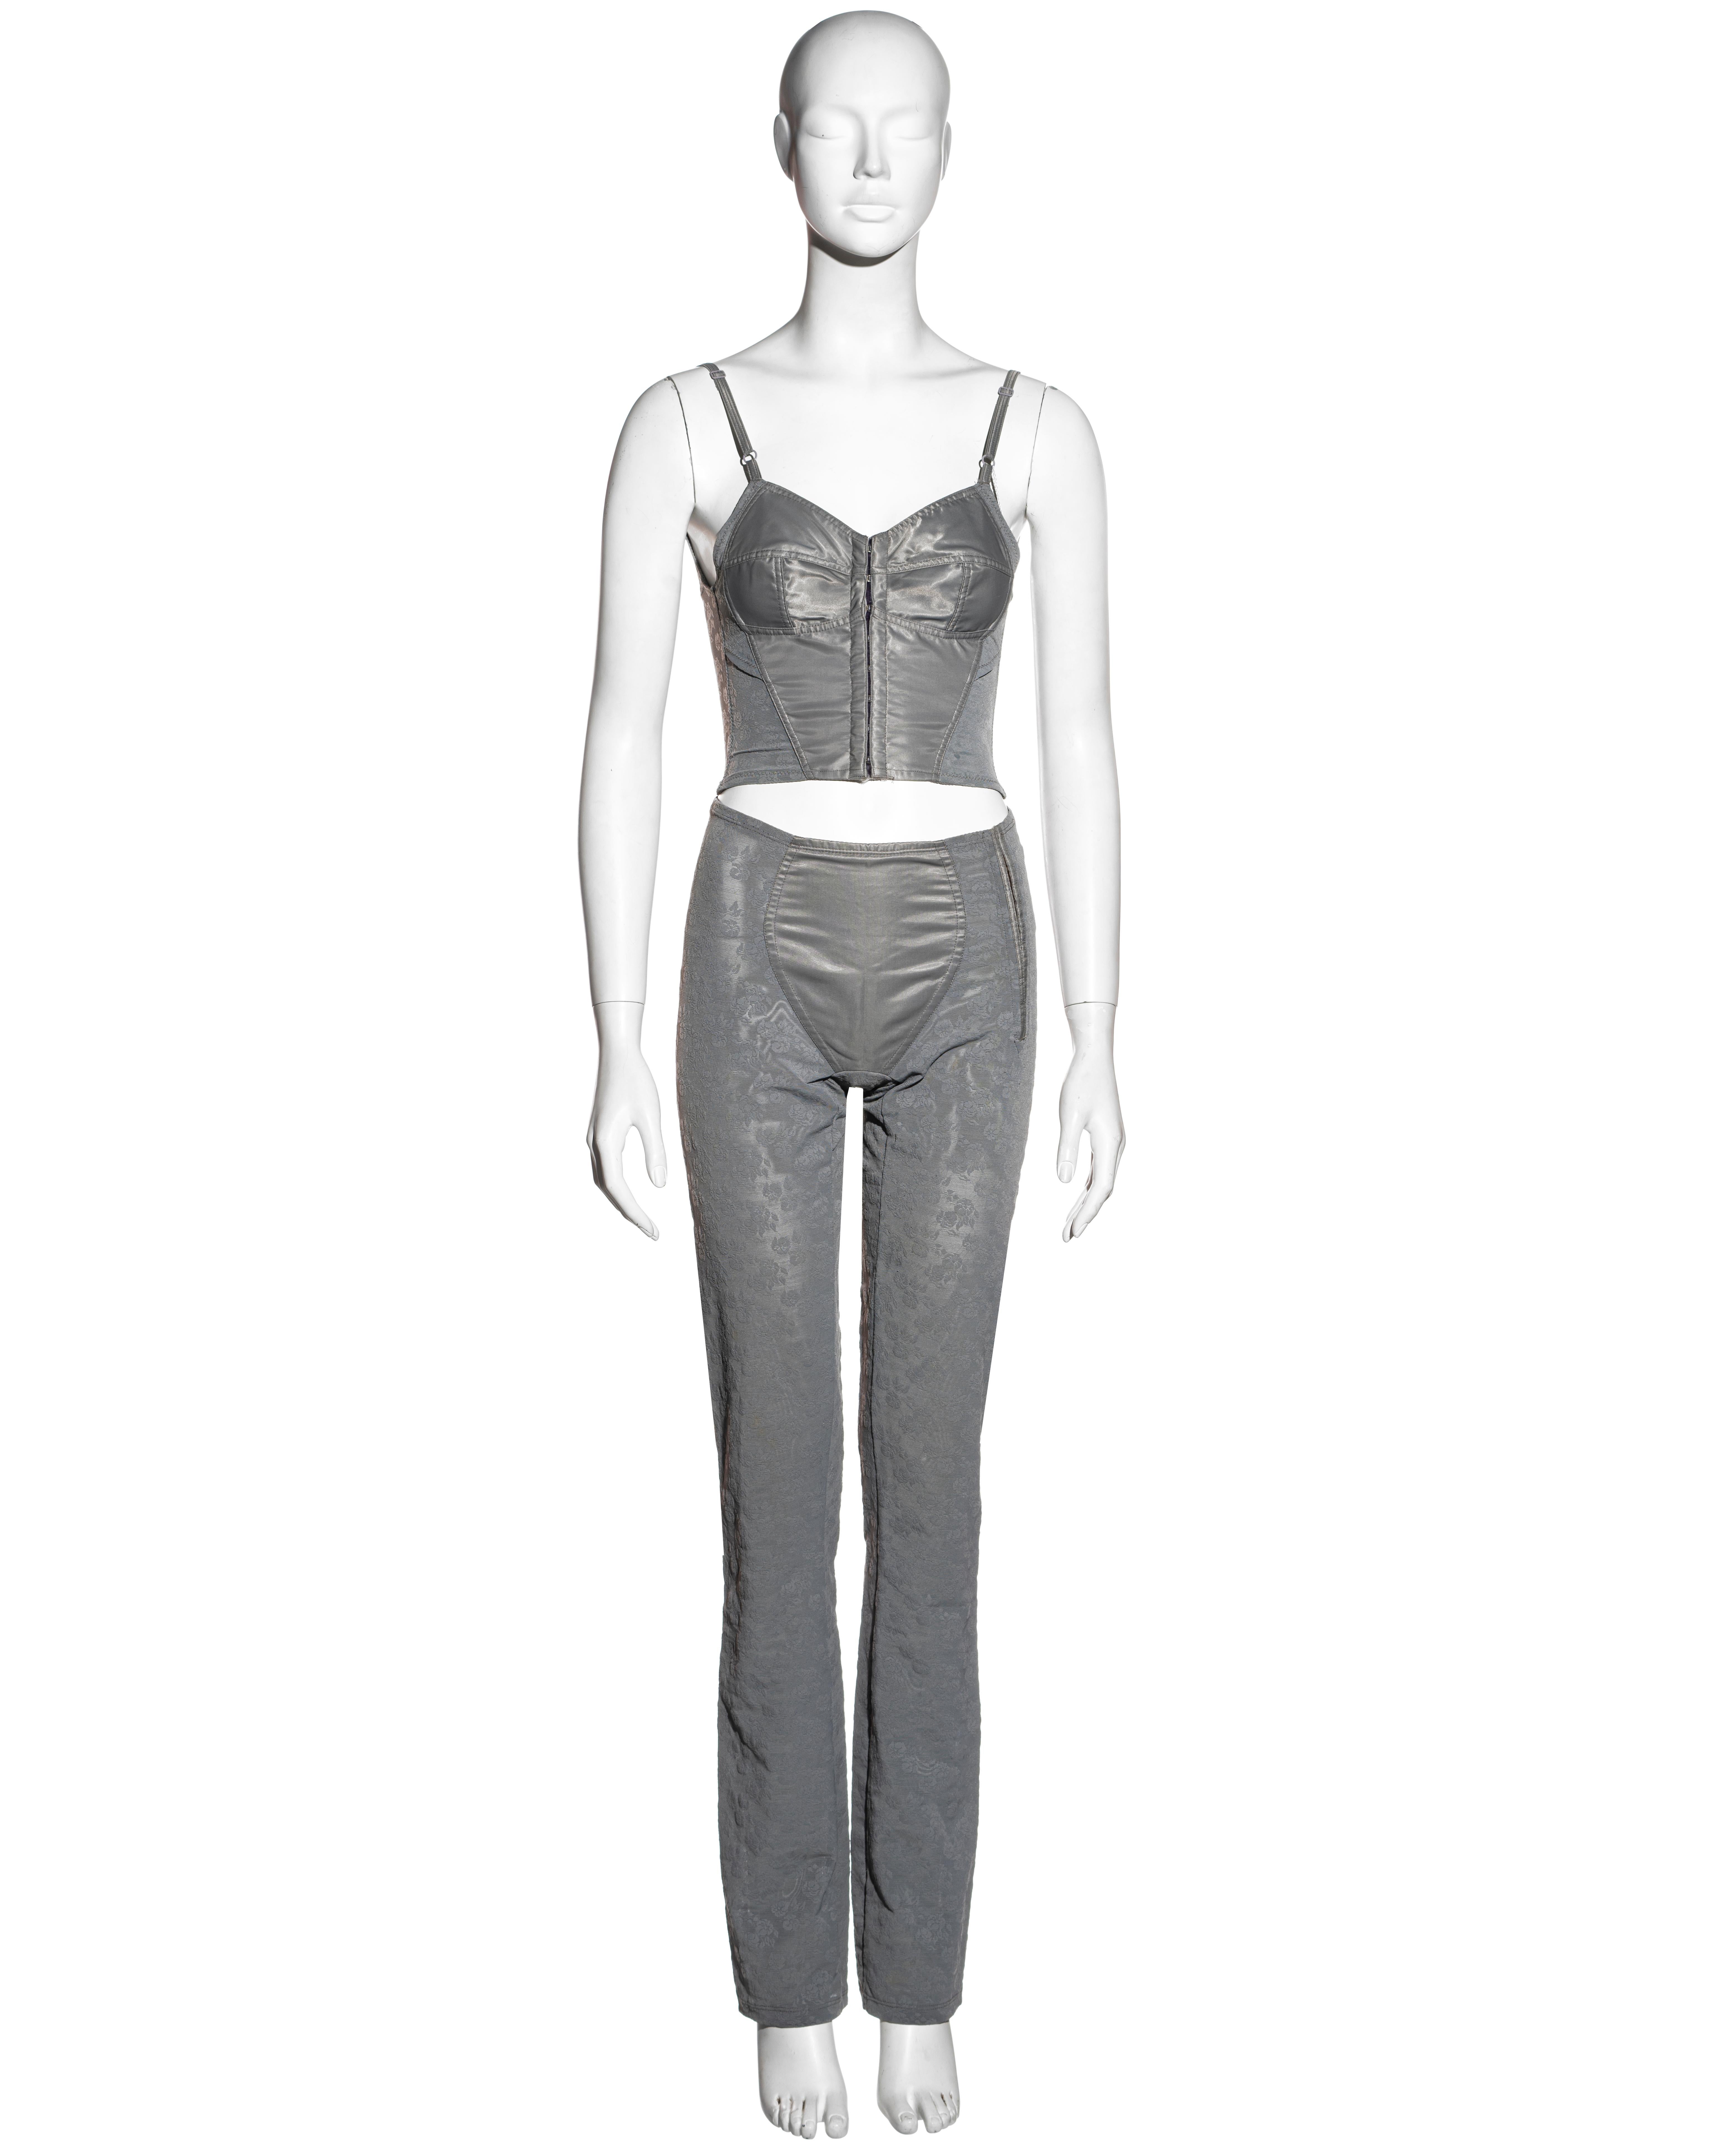 ▪ Dolce & Gabbana grey corset top and pants set
▪ Corset top with center front hooks and adjustable straps
▪ Straight-leg fitted pants with hook fasteners at the hip
▪ Satin panels to the front 
▪ Floral jacquard power mesh
▪ 80% Nylon, 20% Lycra
▪